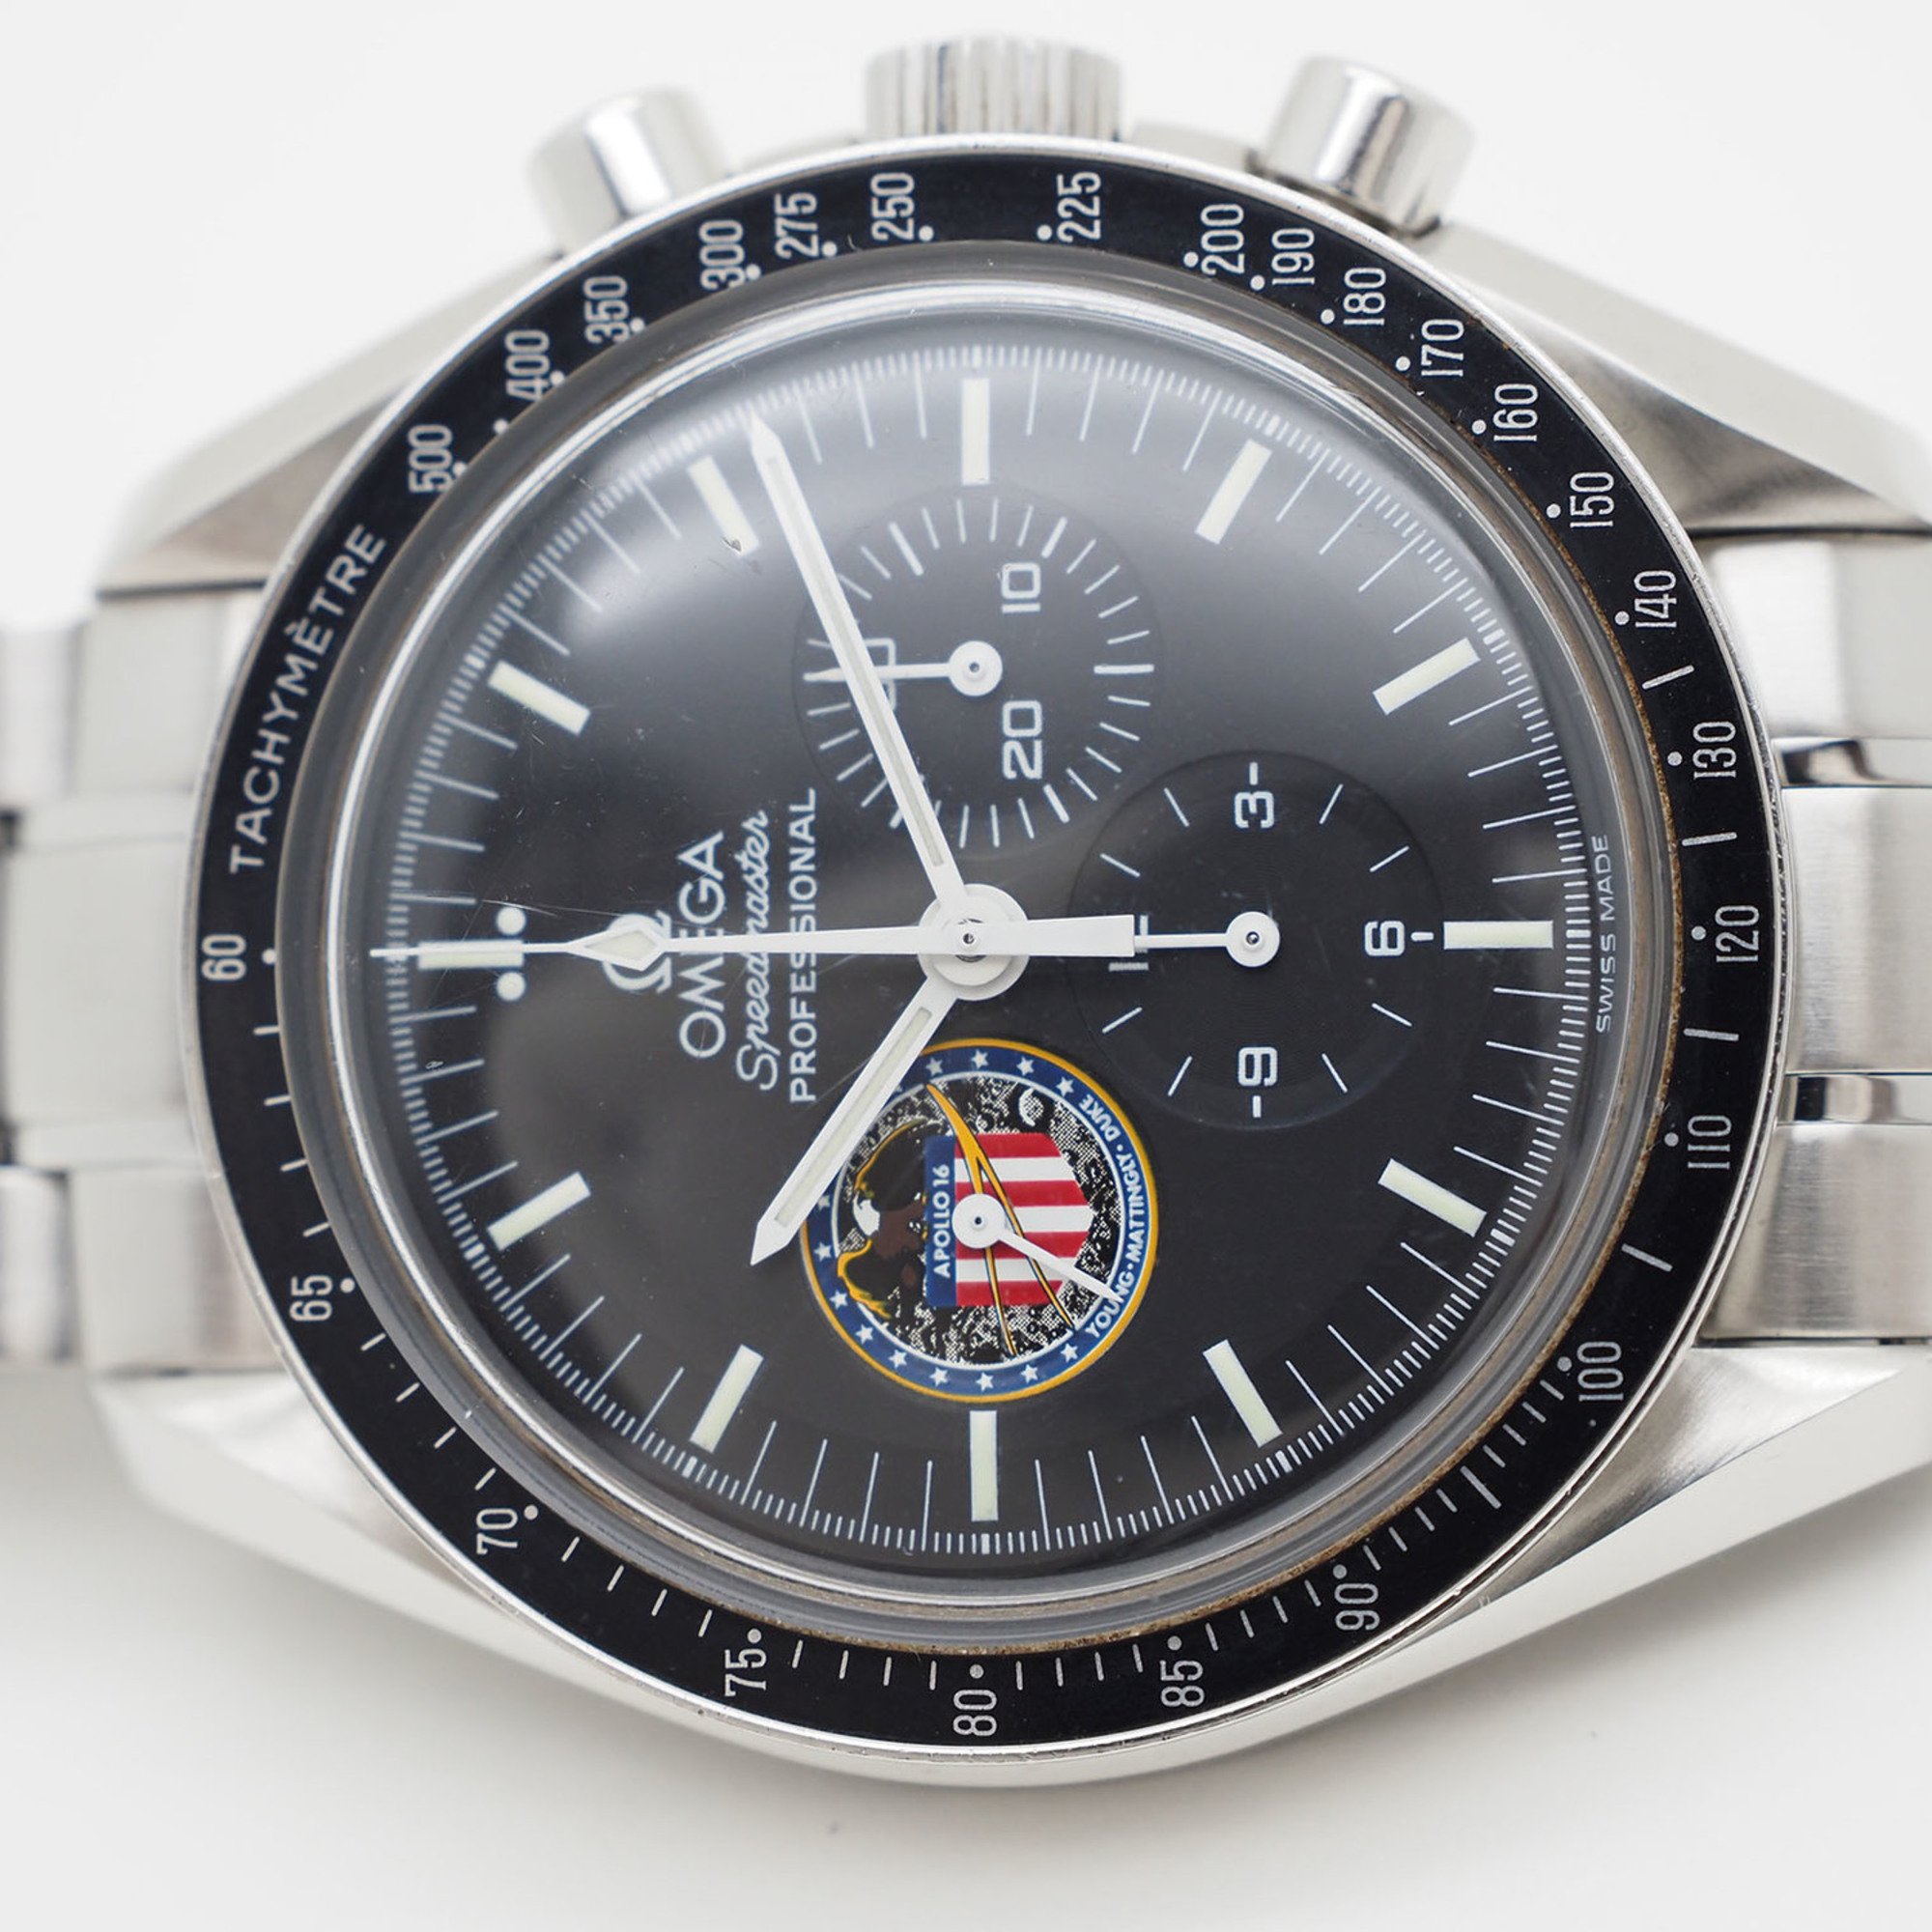 OMEGA Speedmaster Professional Missions Apollo 16 41mm Watch 3597.19 Silver Men's